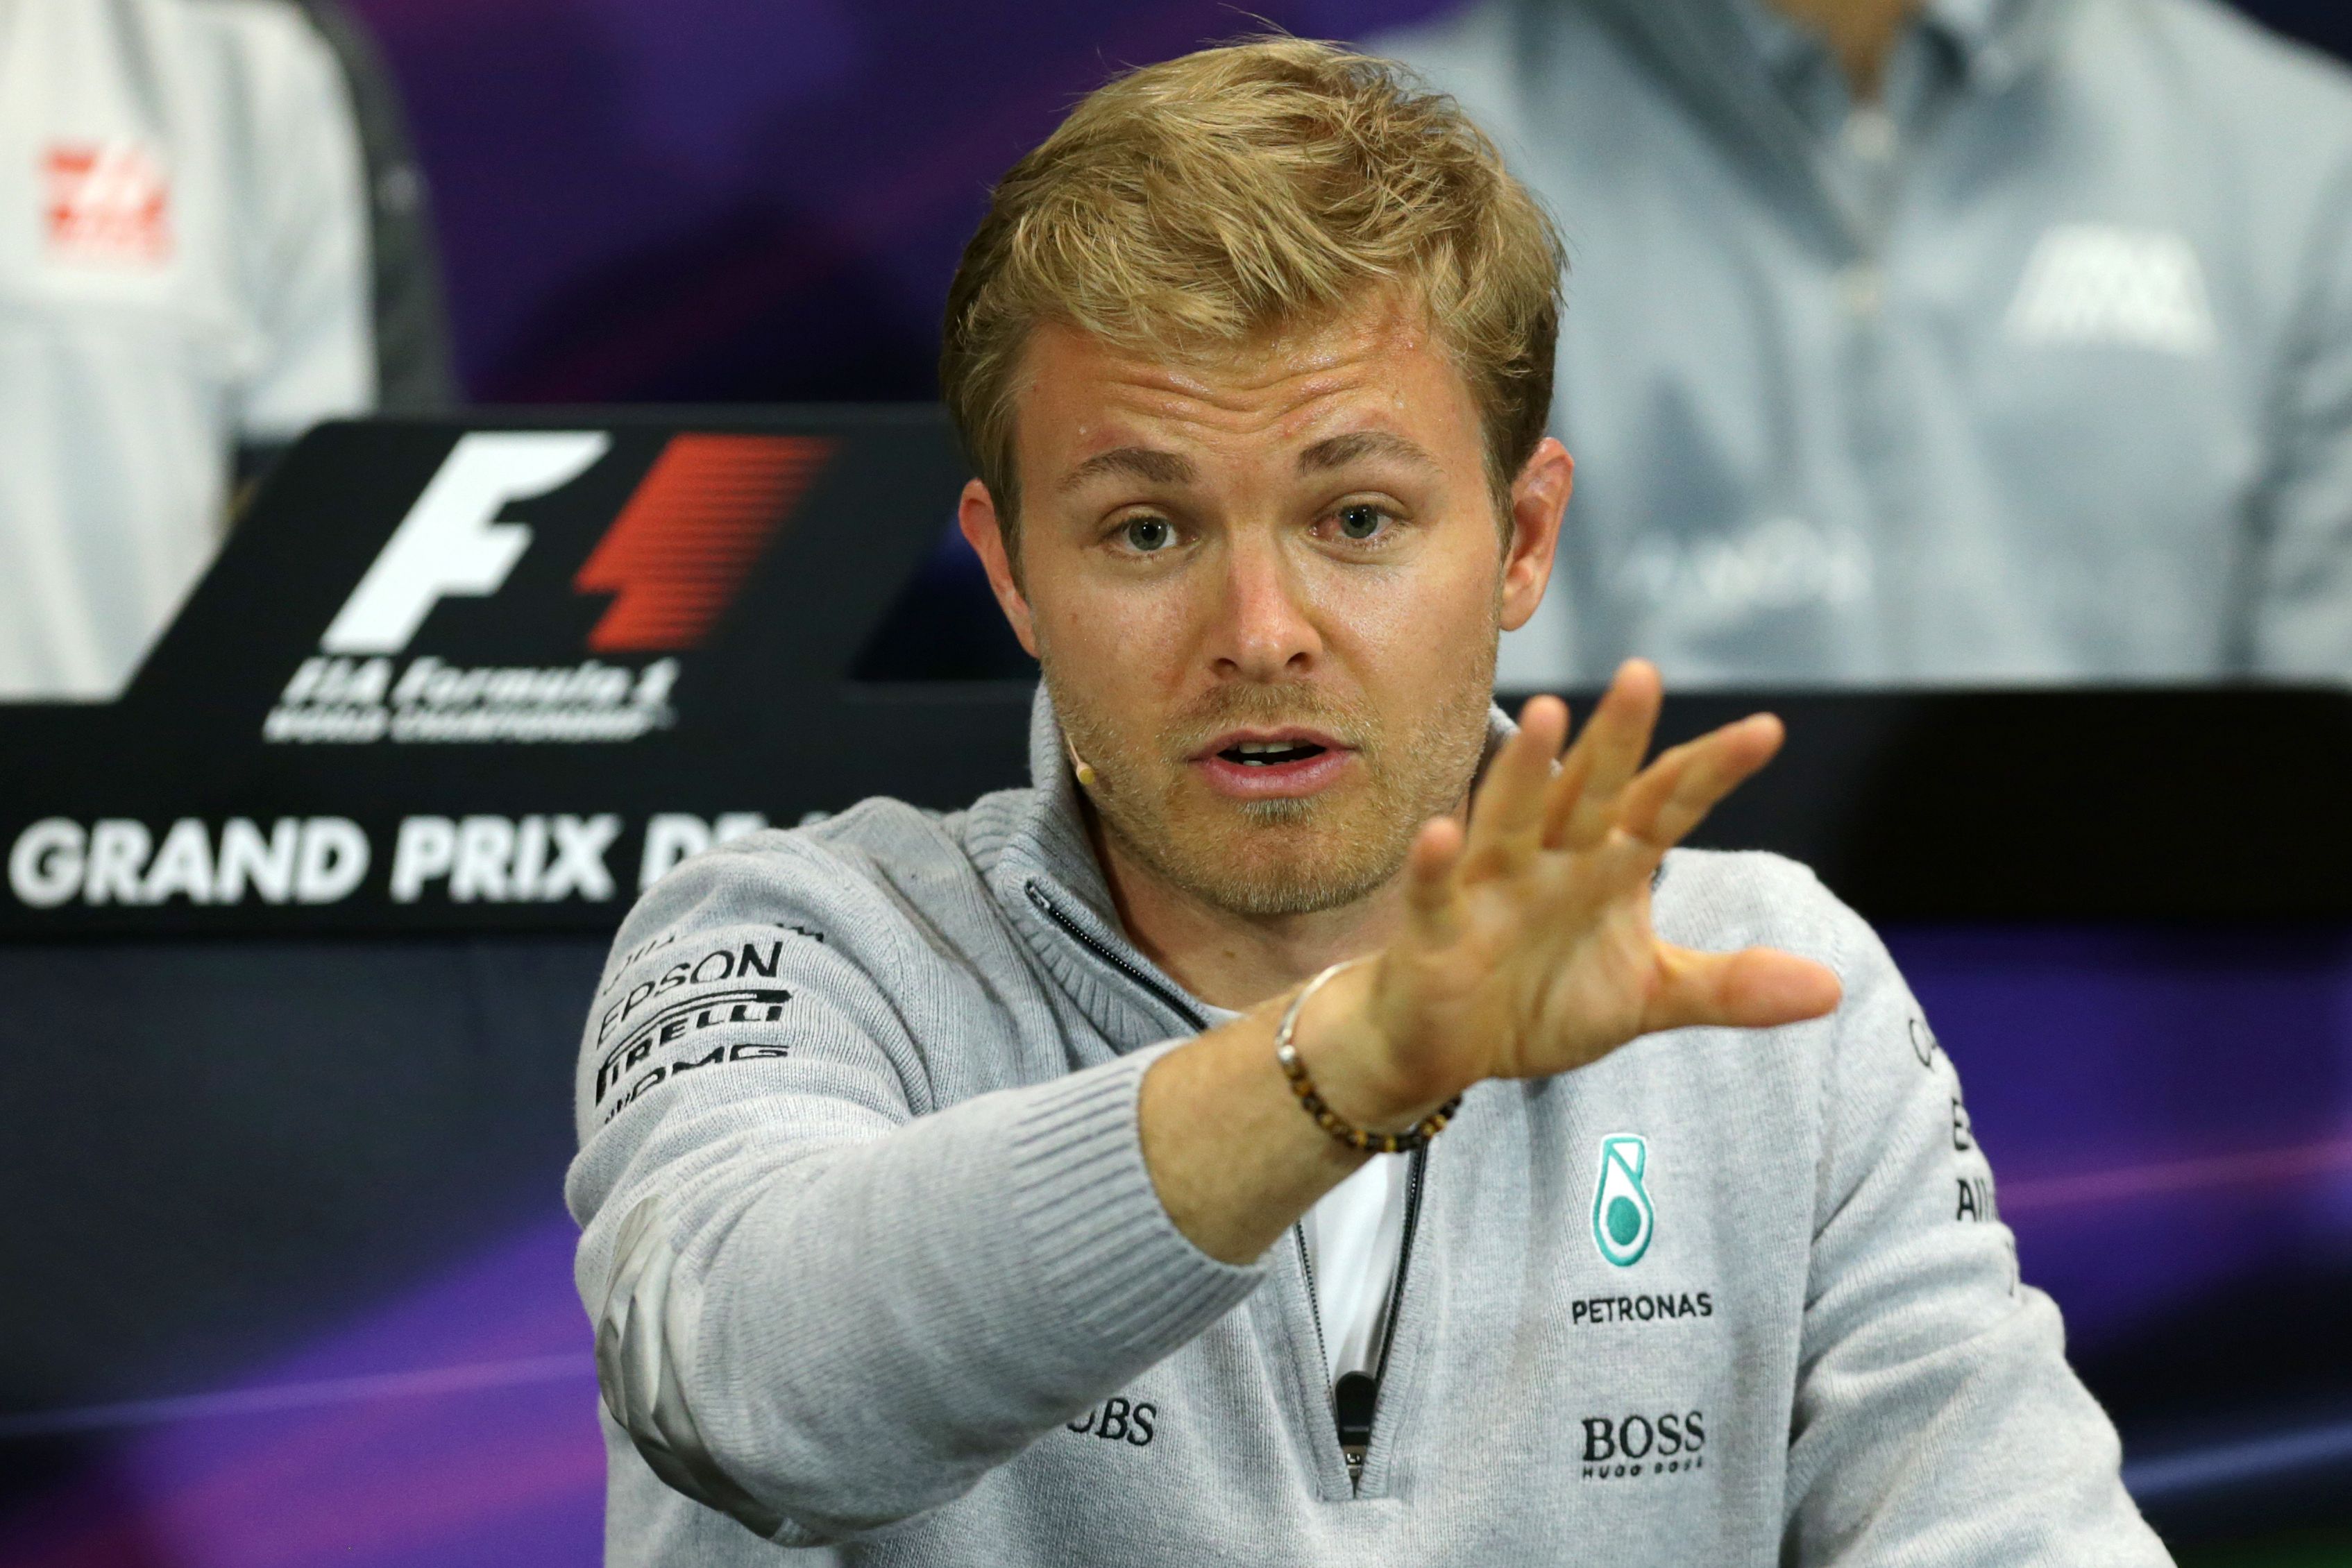 'Pure respect' as Hamilton and Rosberg clear the air